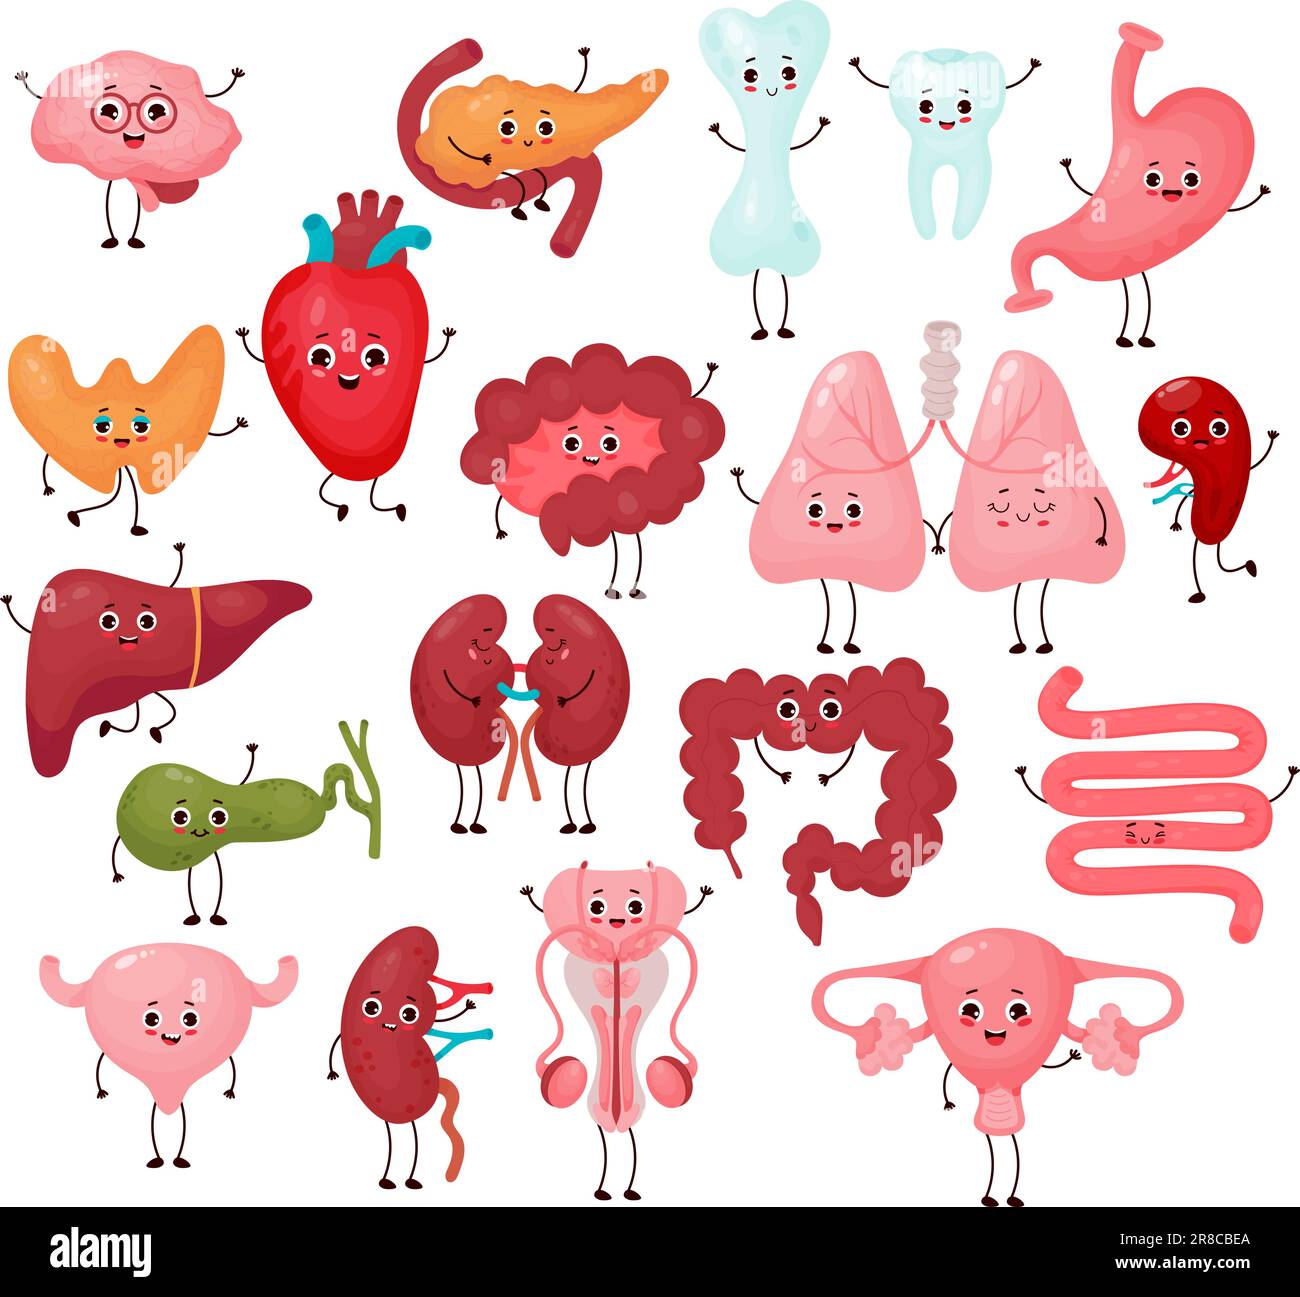 Big collection cute human cartoon organs. Isolated vector flat funny cartoon characters illustrations. Anatomy concept Stock Vector